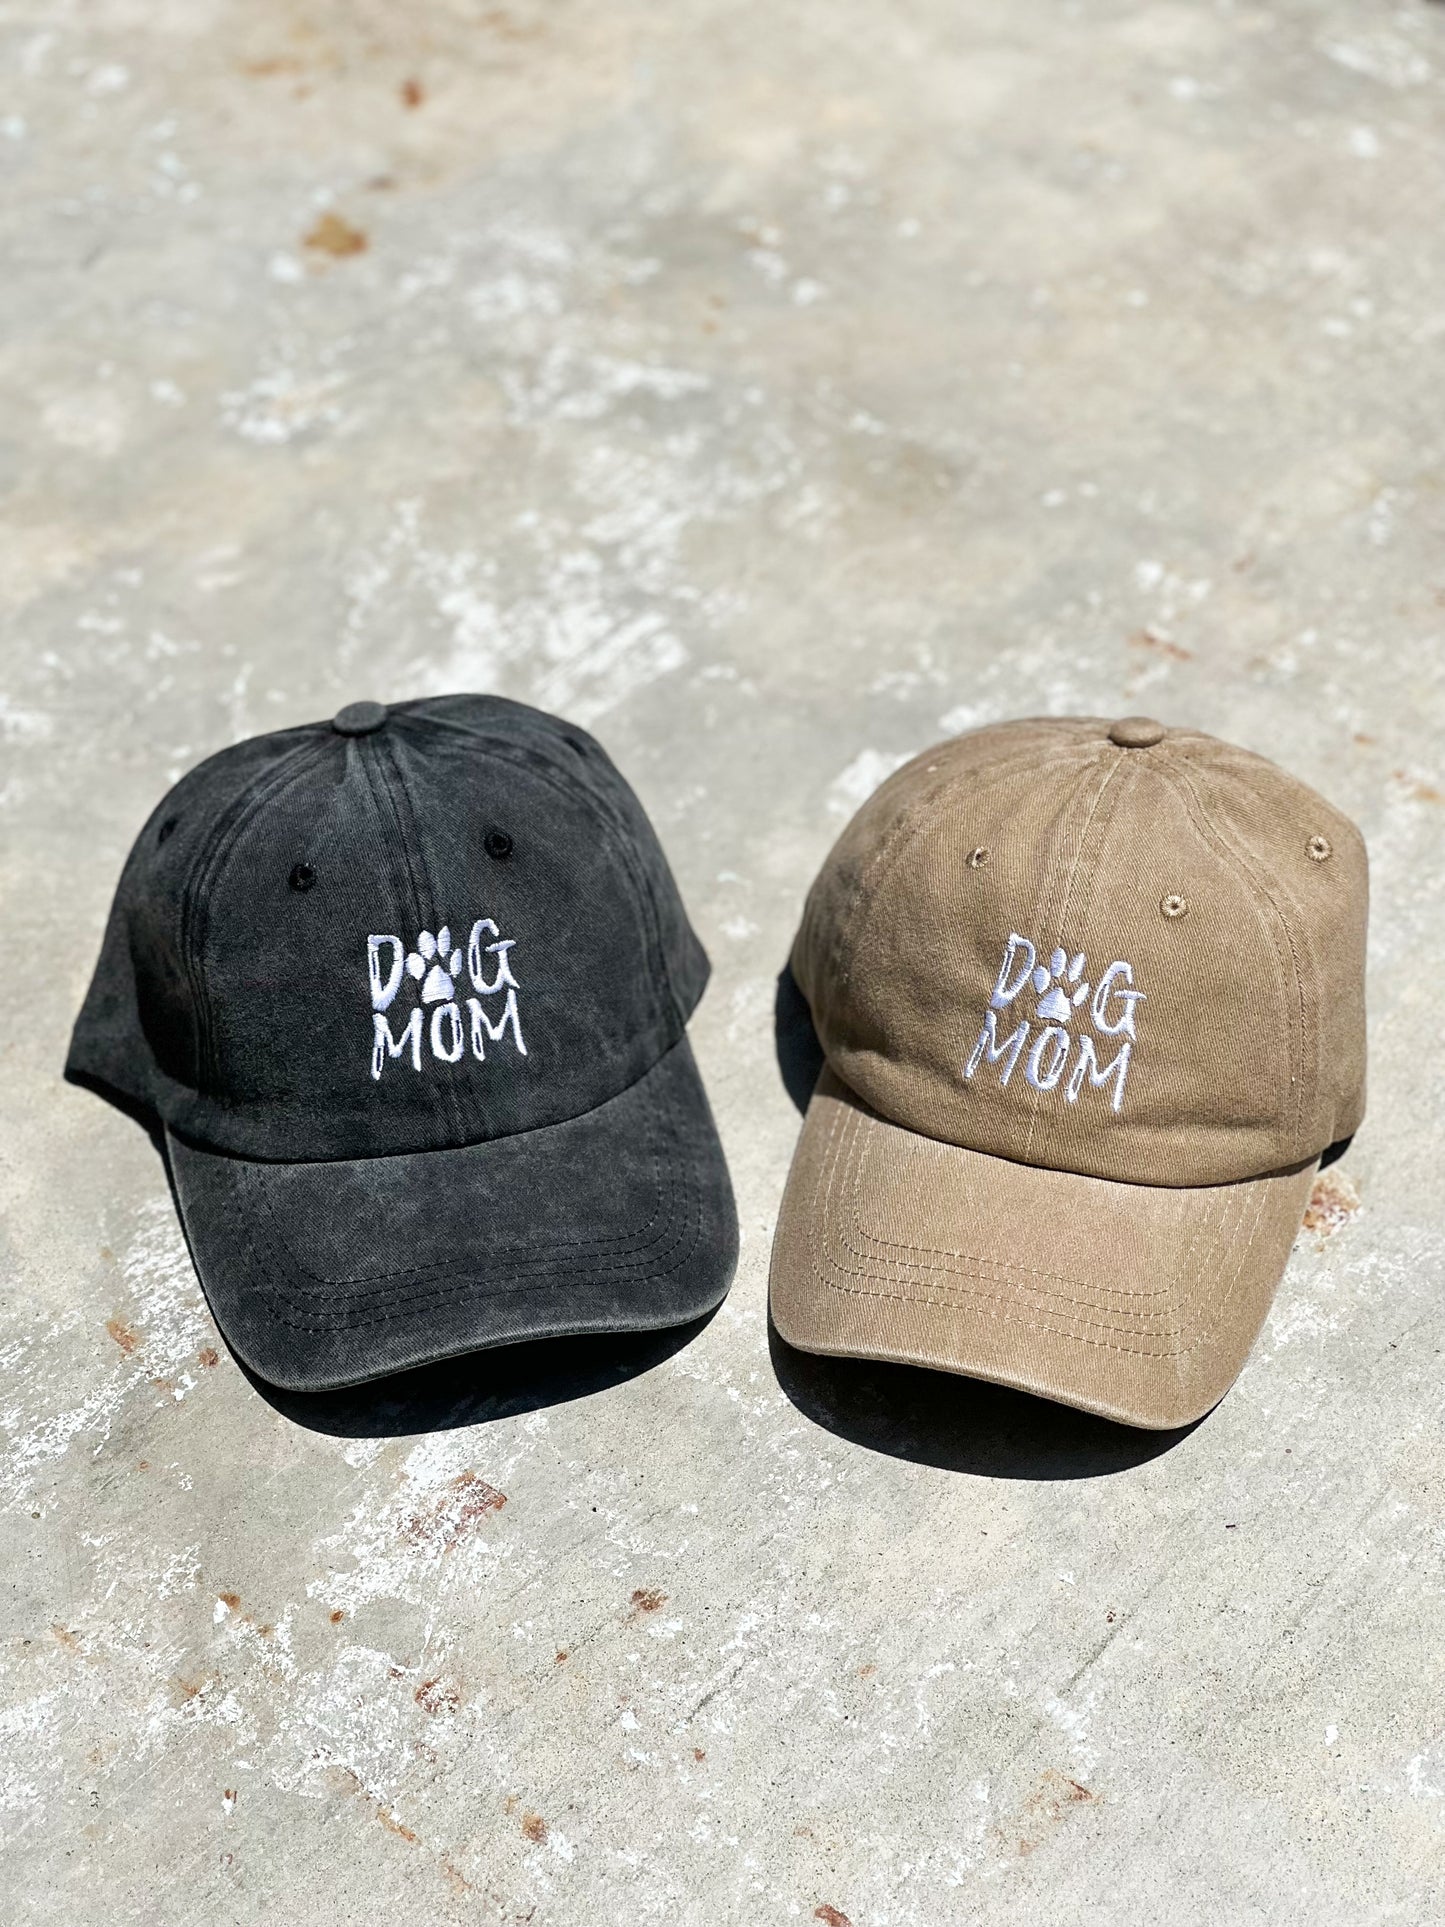 There is two baseball caps on a concrete gray floor. One baseball cap is charcoal black and has "dog mom" printed on the front. Next to it is a beige nude baseball cap with a "Dog Mom" print on it in the front.